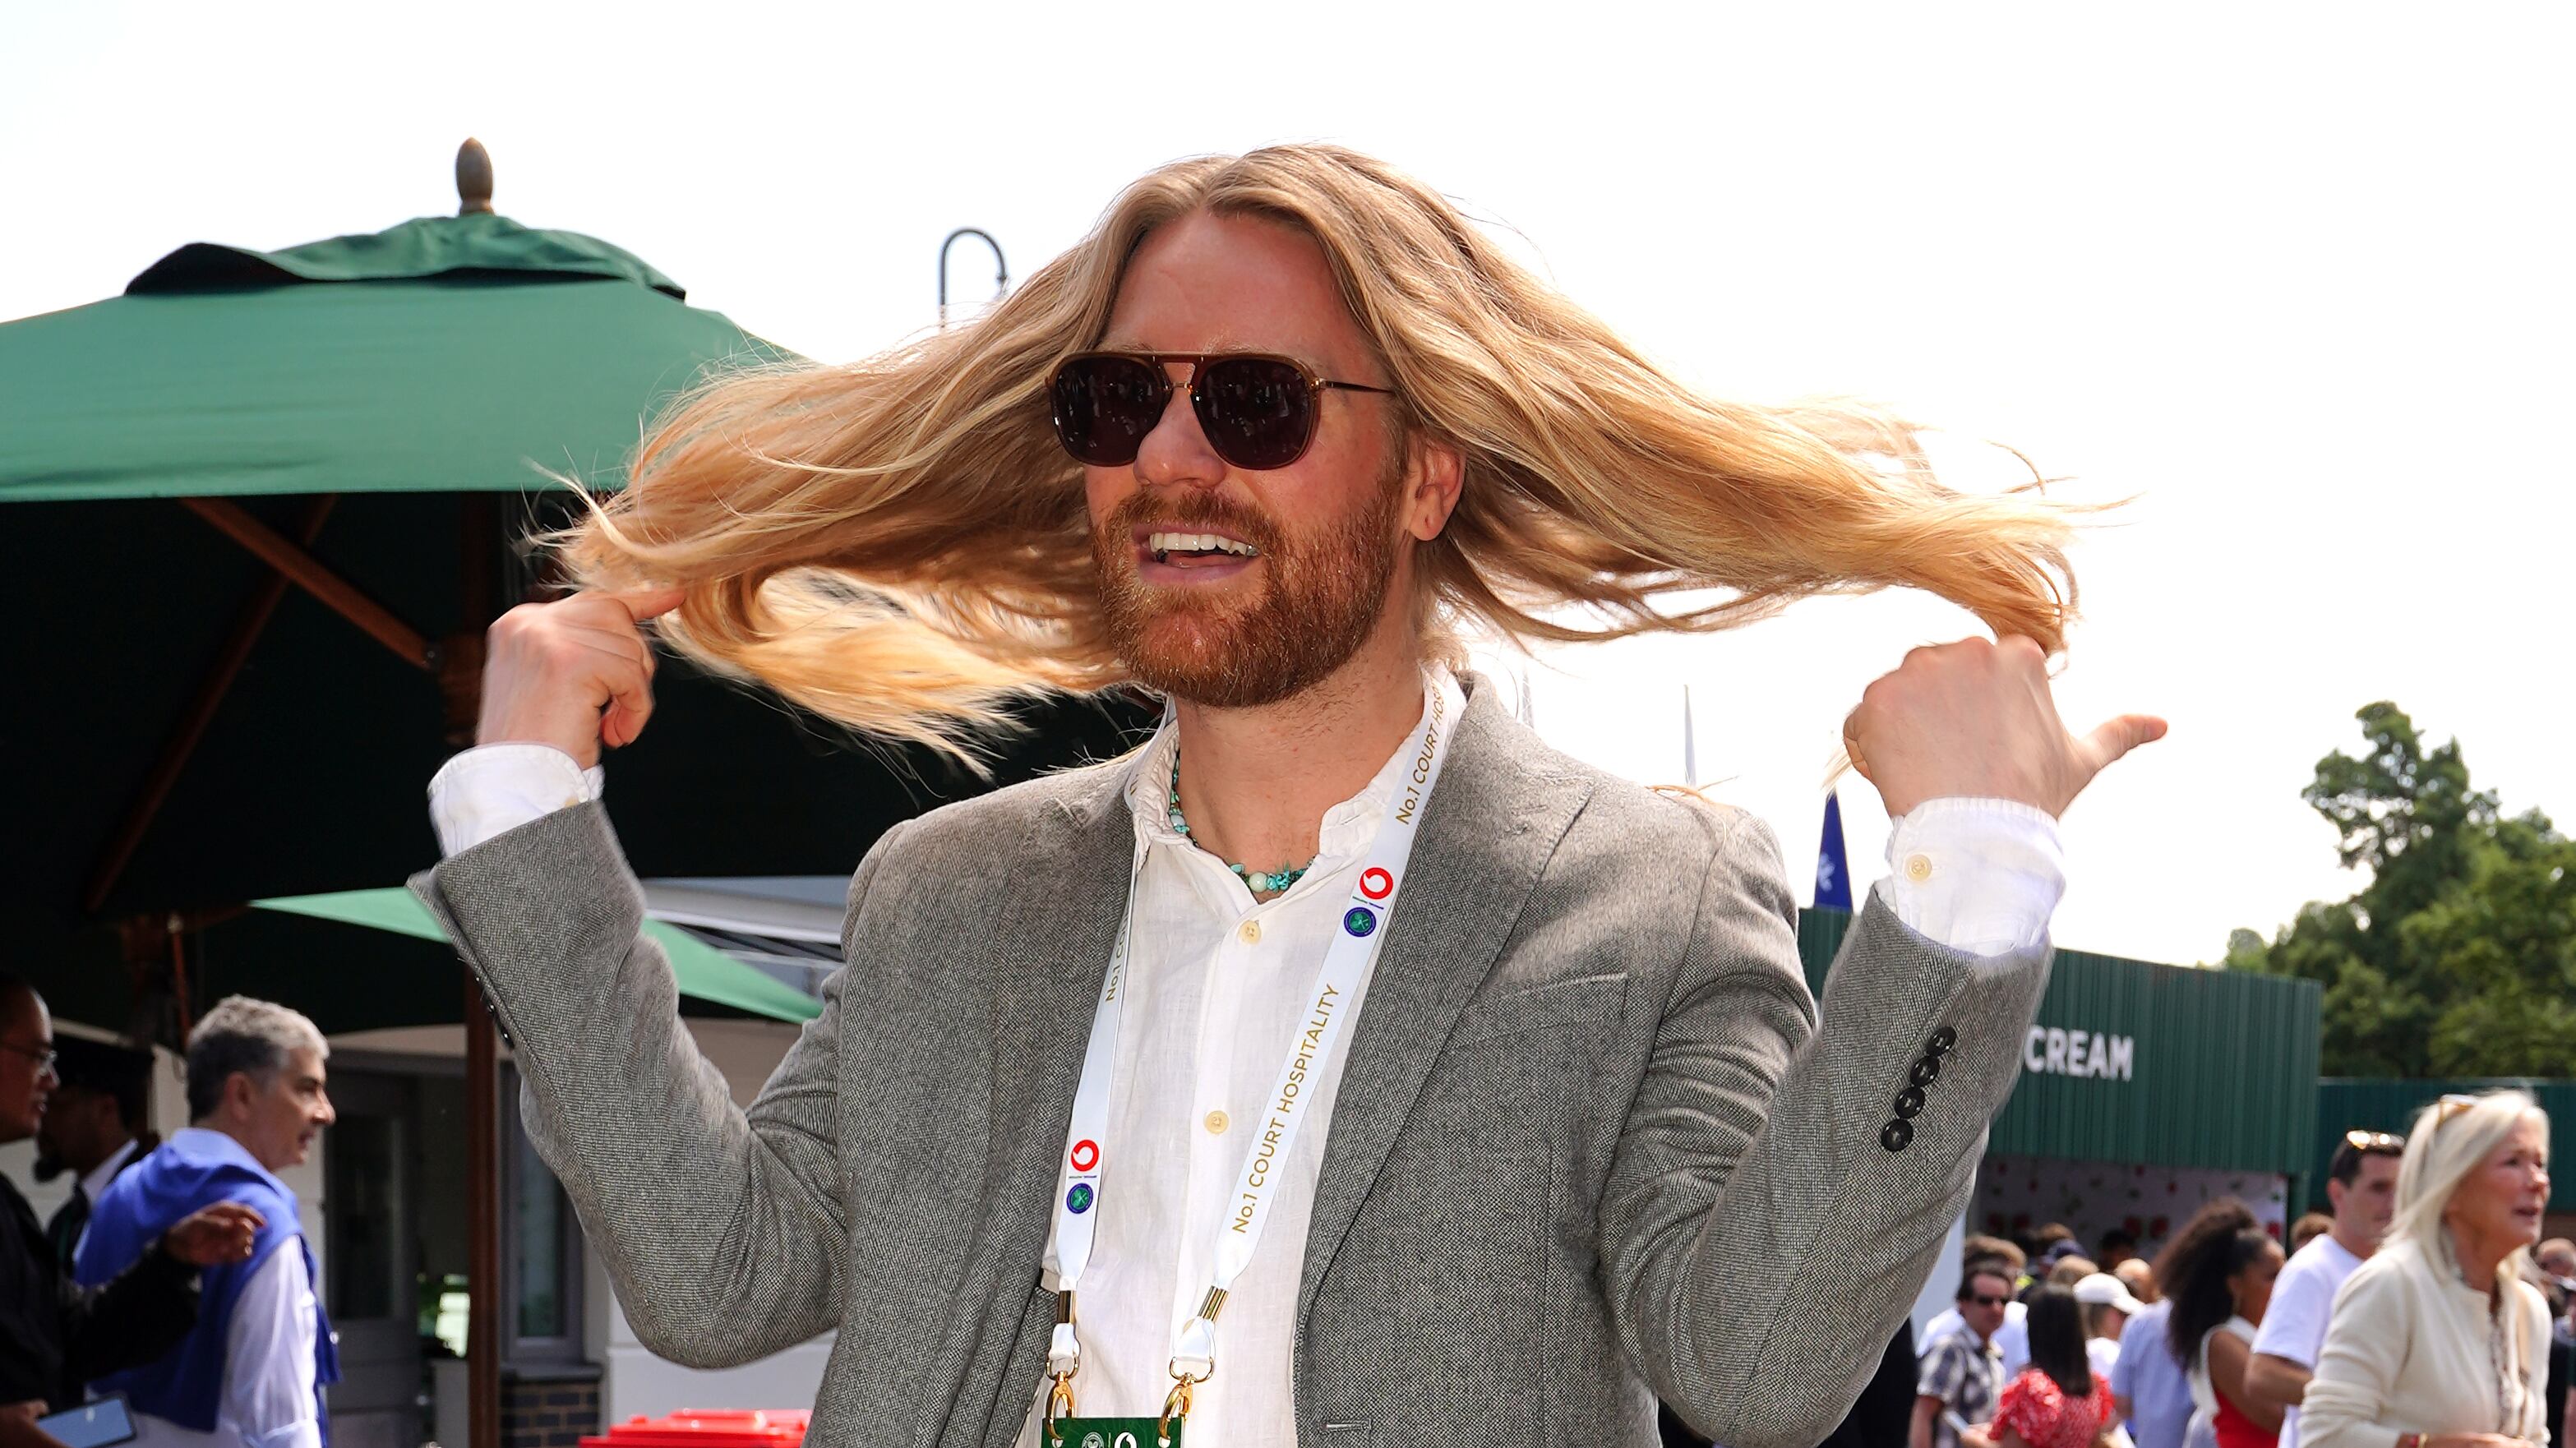 Sam Ryder was among the celebrities enjoying Wimbledon on day four of the championships